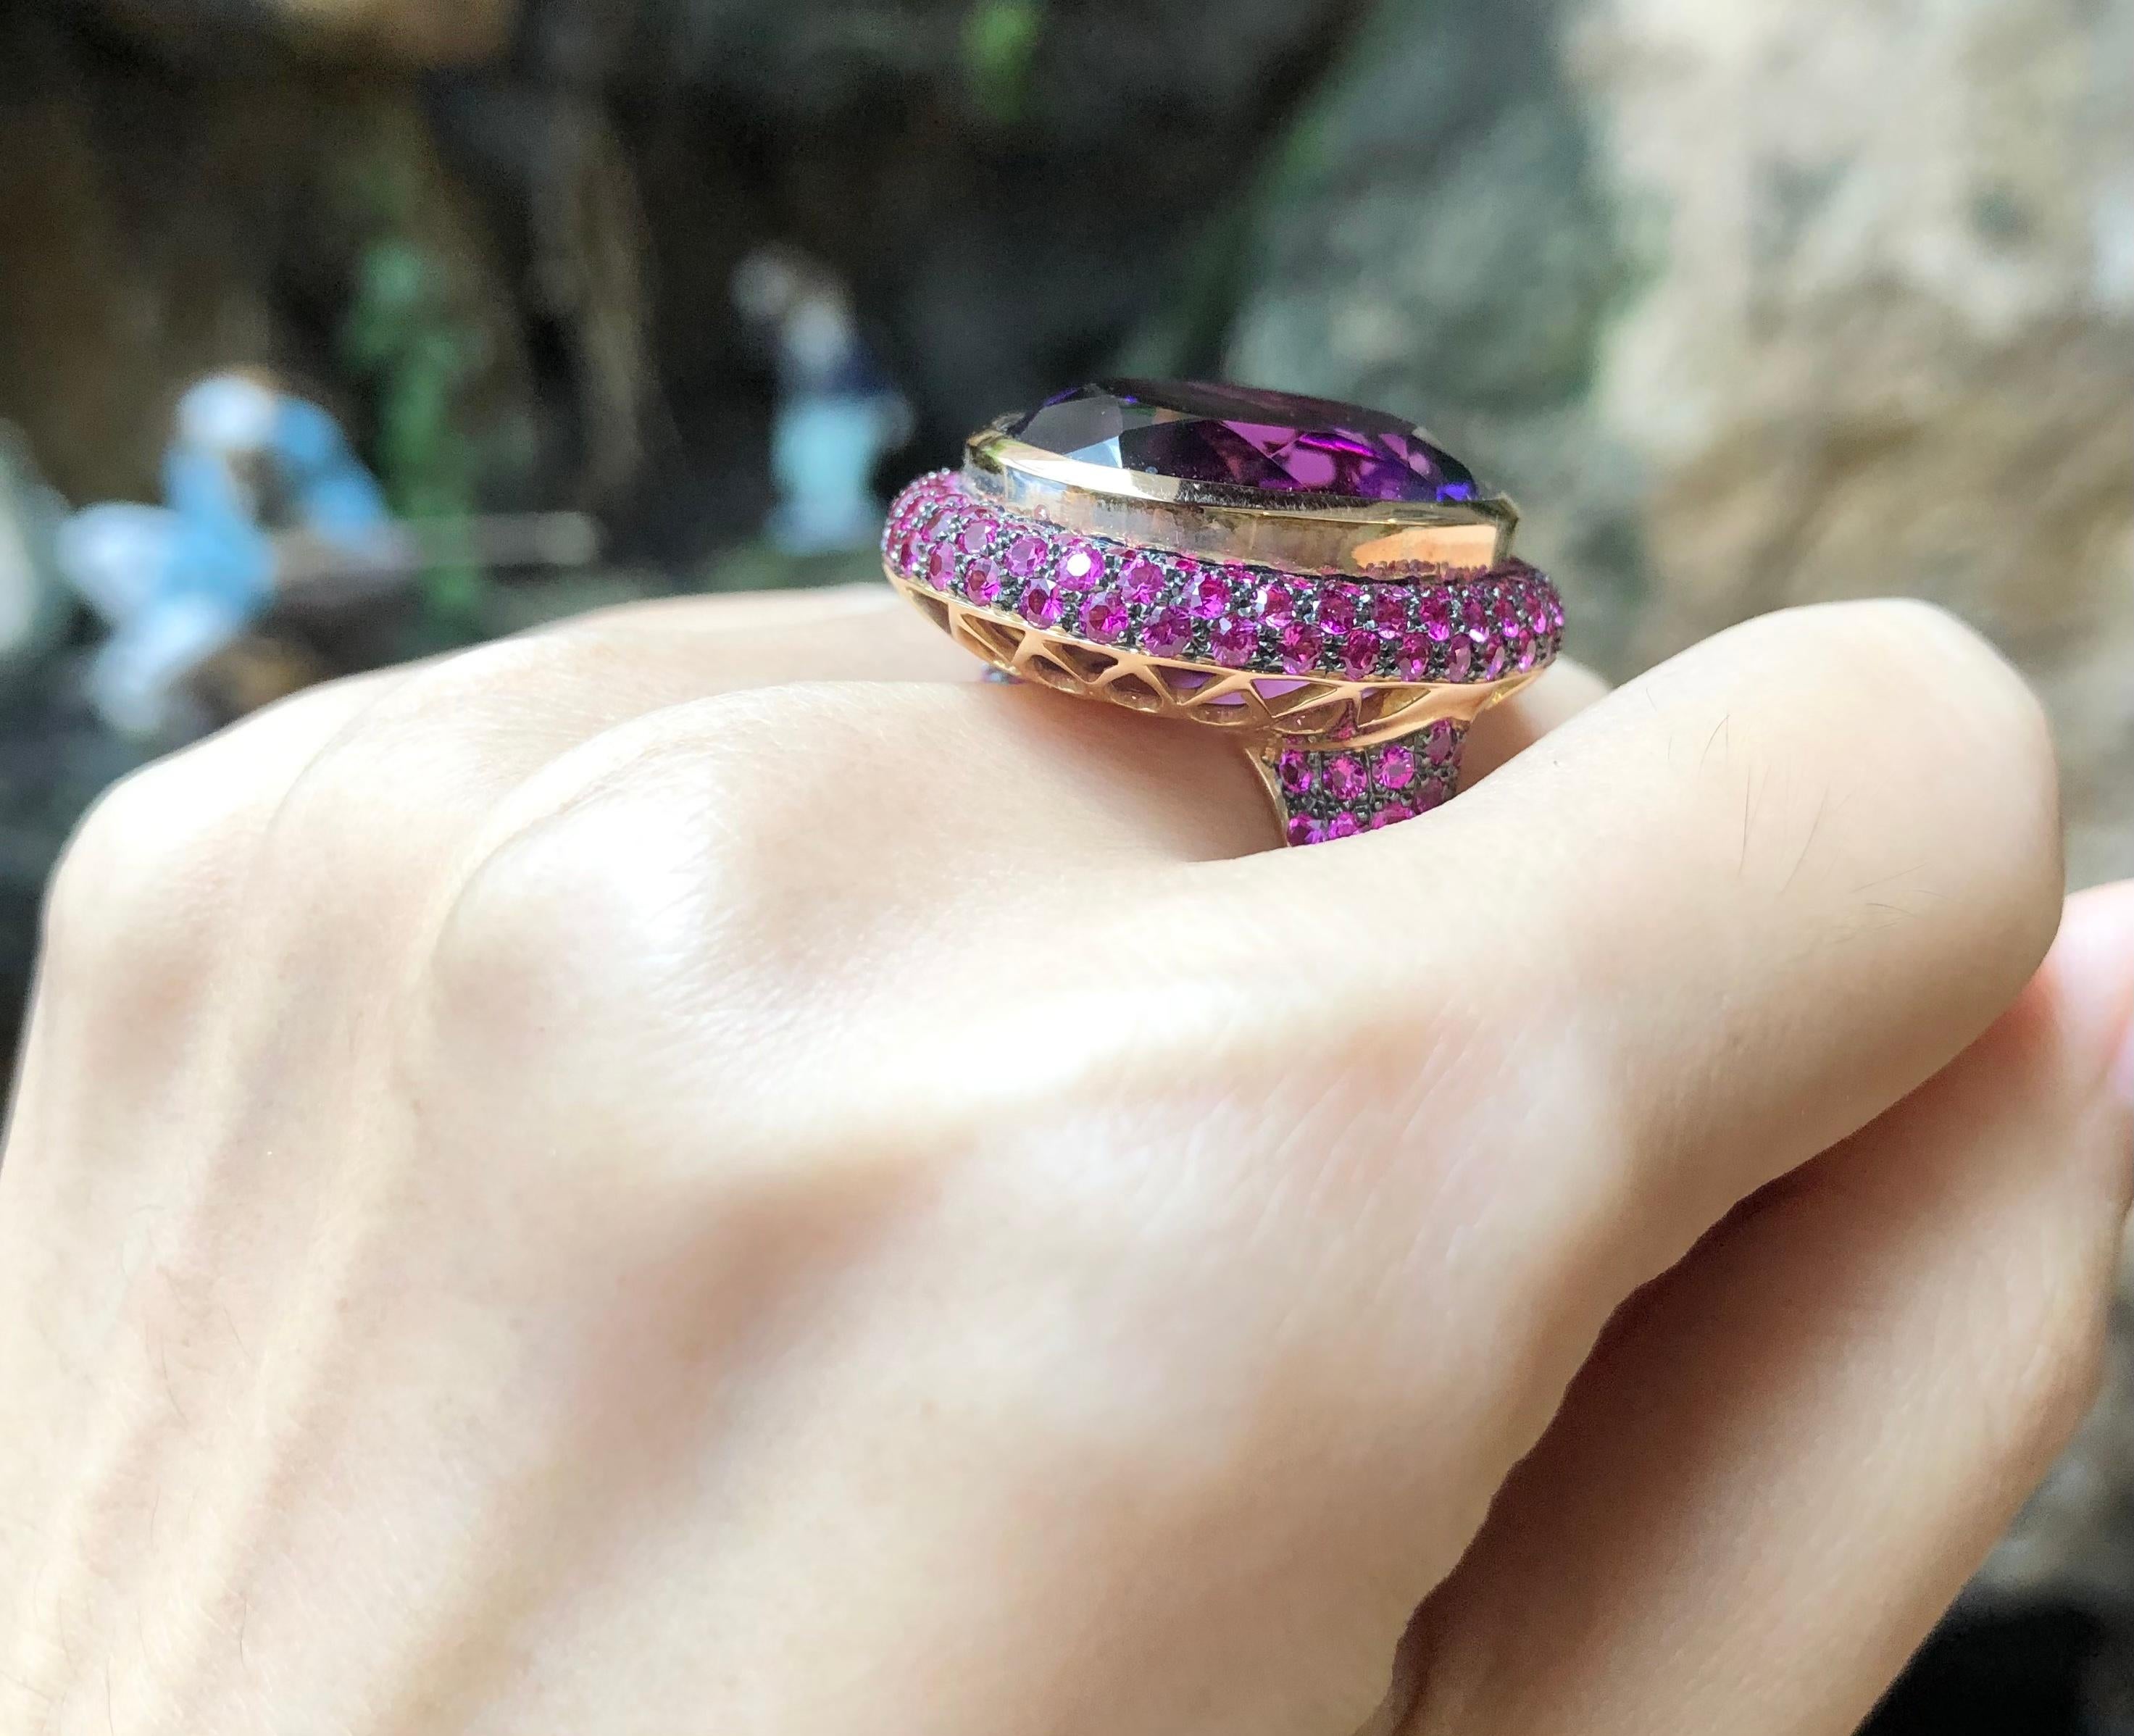 Amethyst 25.21 carats with Pink Sapphire 4.04 carats Ring set in 18 Karat Rose Gold Settings

Width:  2.4 cm 
Length: 3.0 cm
Ring Size: 51
Total Weight: 26.71 grams

